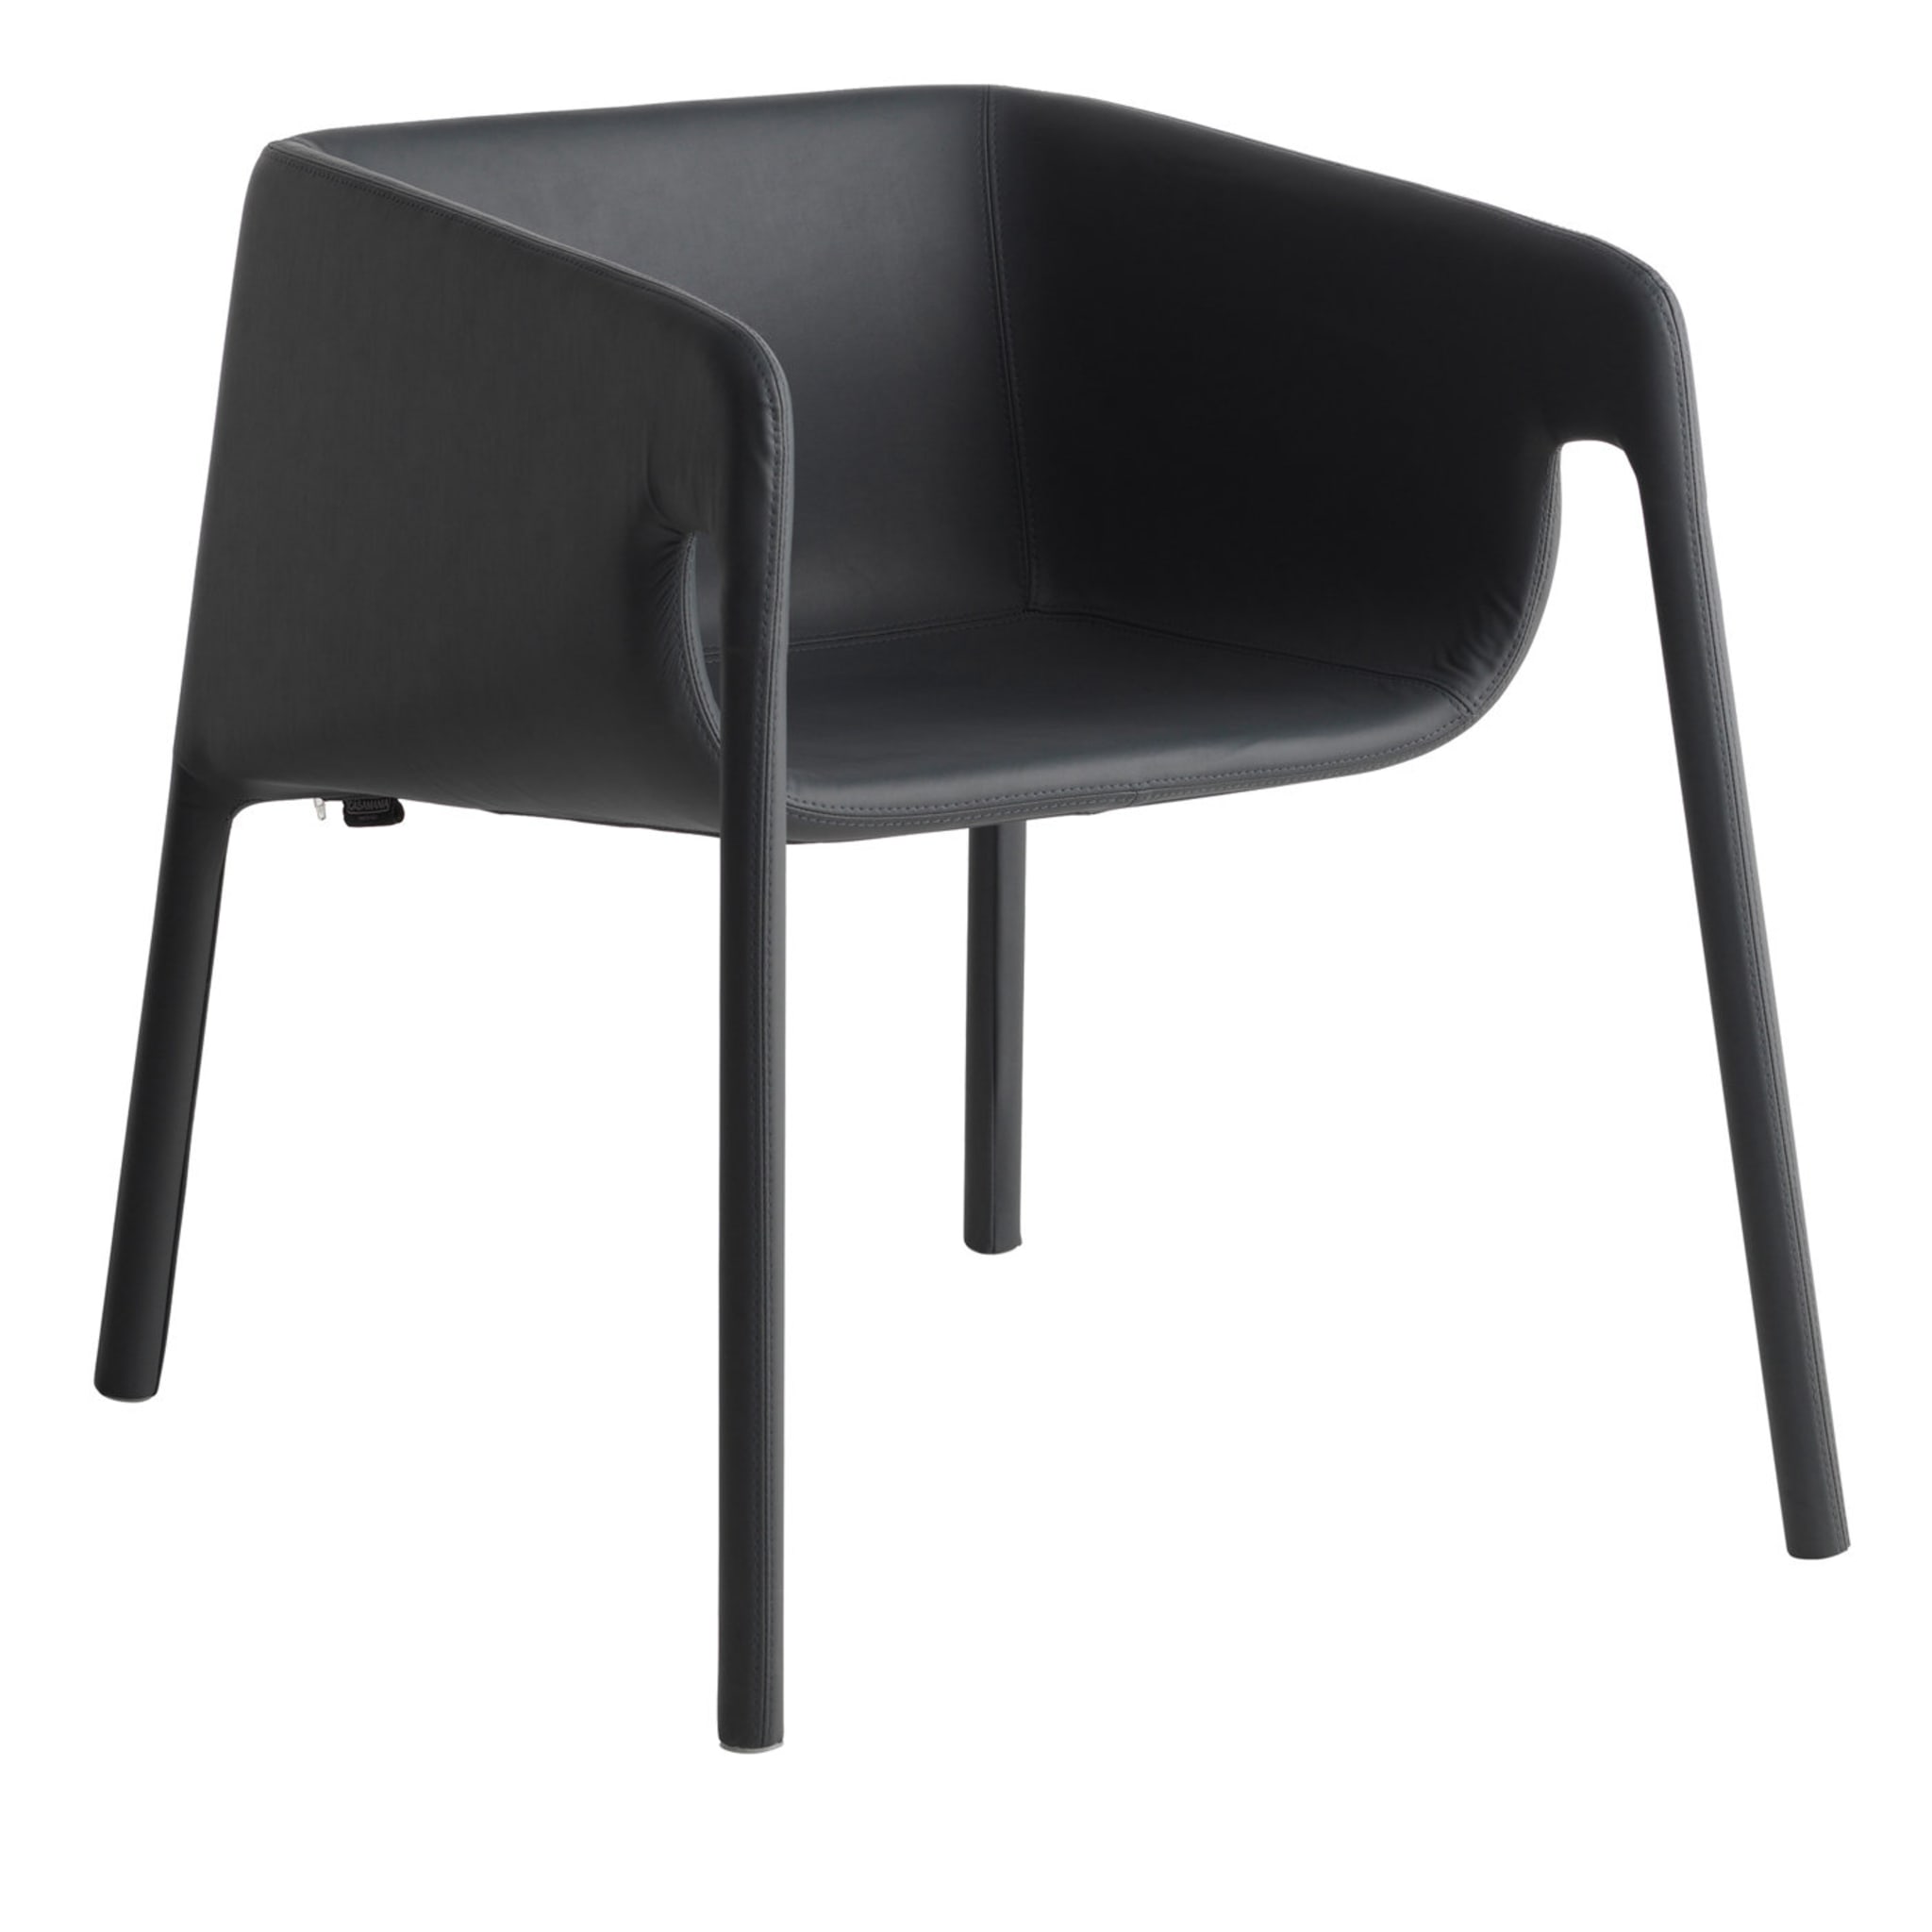 Lobby Black Leather Chair by StokkeAustad - Main view